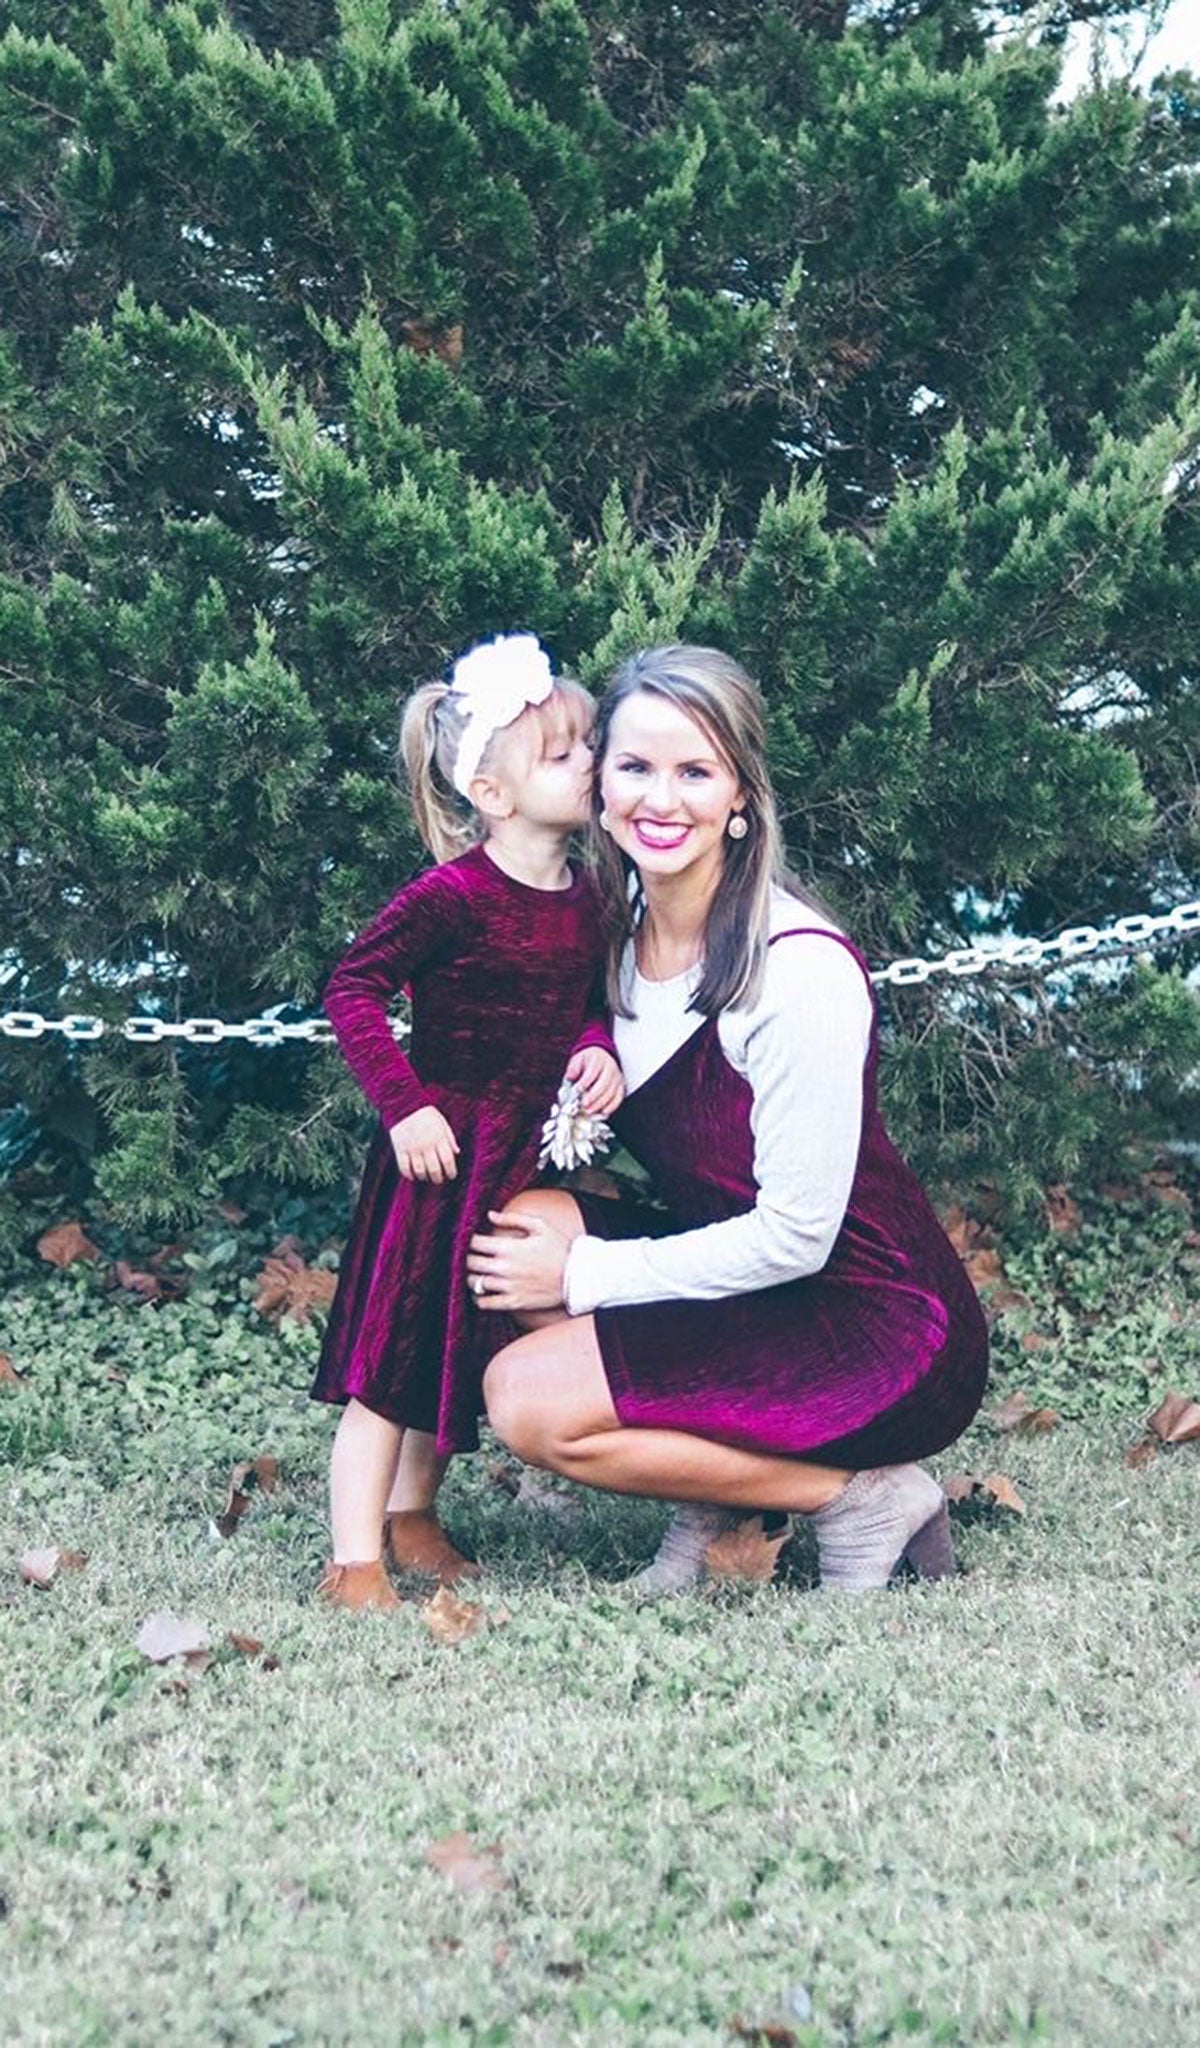 Merlot Aurora dress worn by woman with Cristiano long sleeve oatmeal top layered underneath who is kneeling next to little girl kissing her on the cheek wearing matching Kendyl Dress.